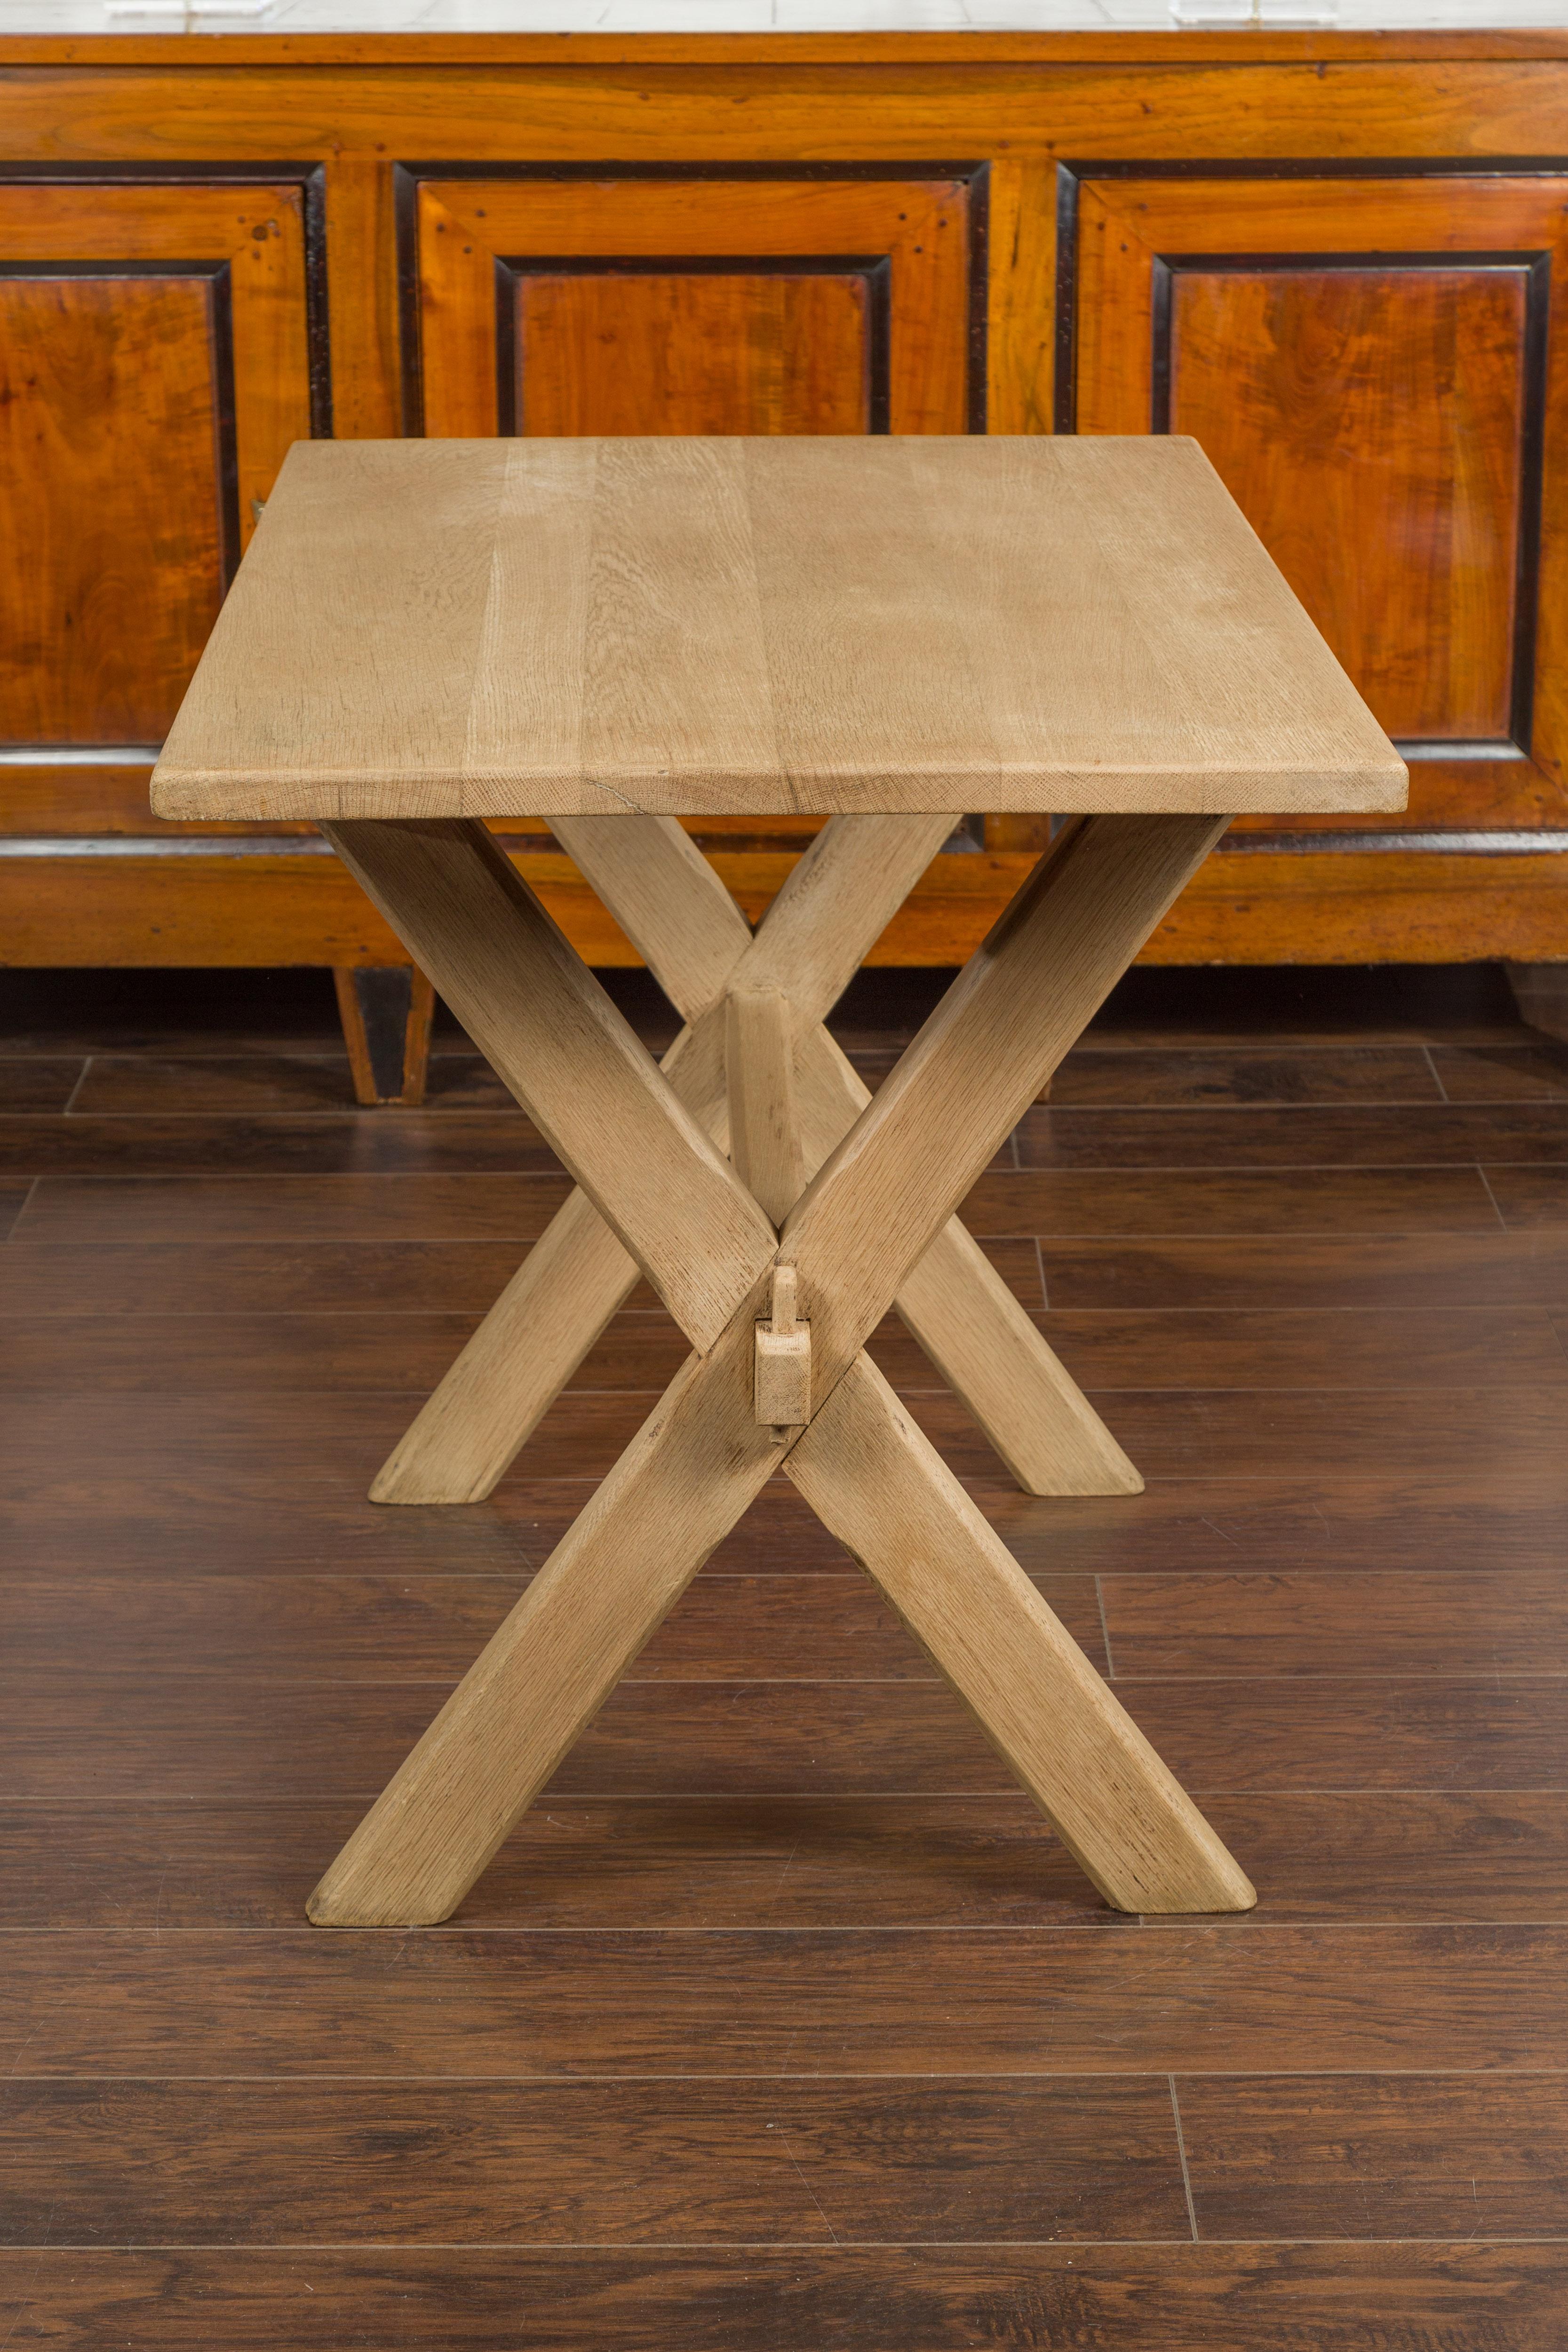 English Turn of the Century Oak Sawbuck Table with X-Form Base, circa 1900 For Sale 8